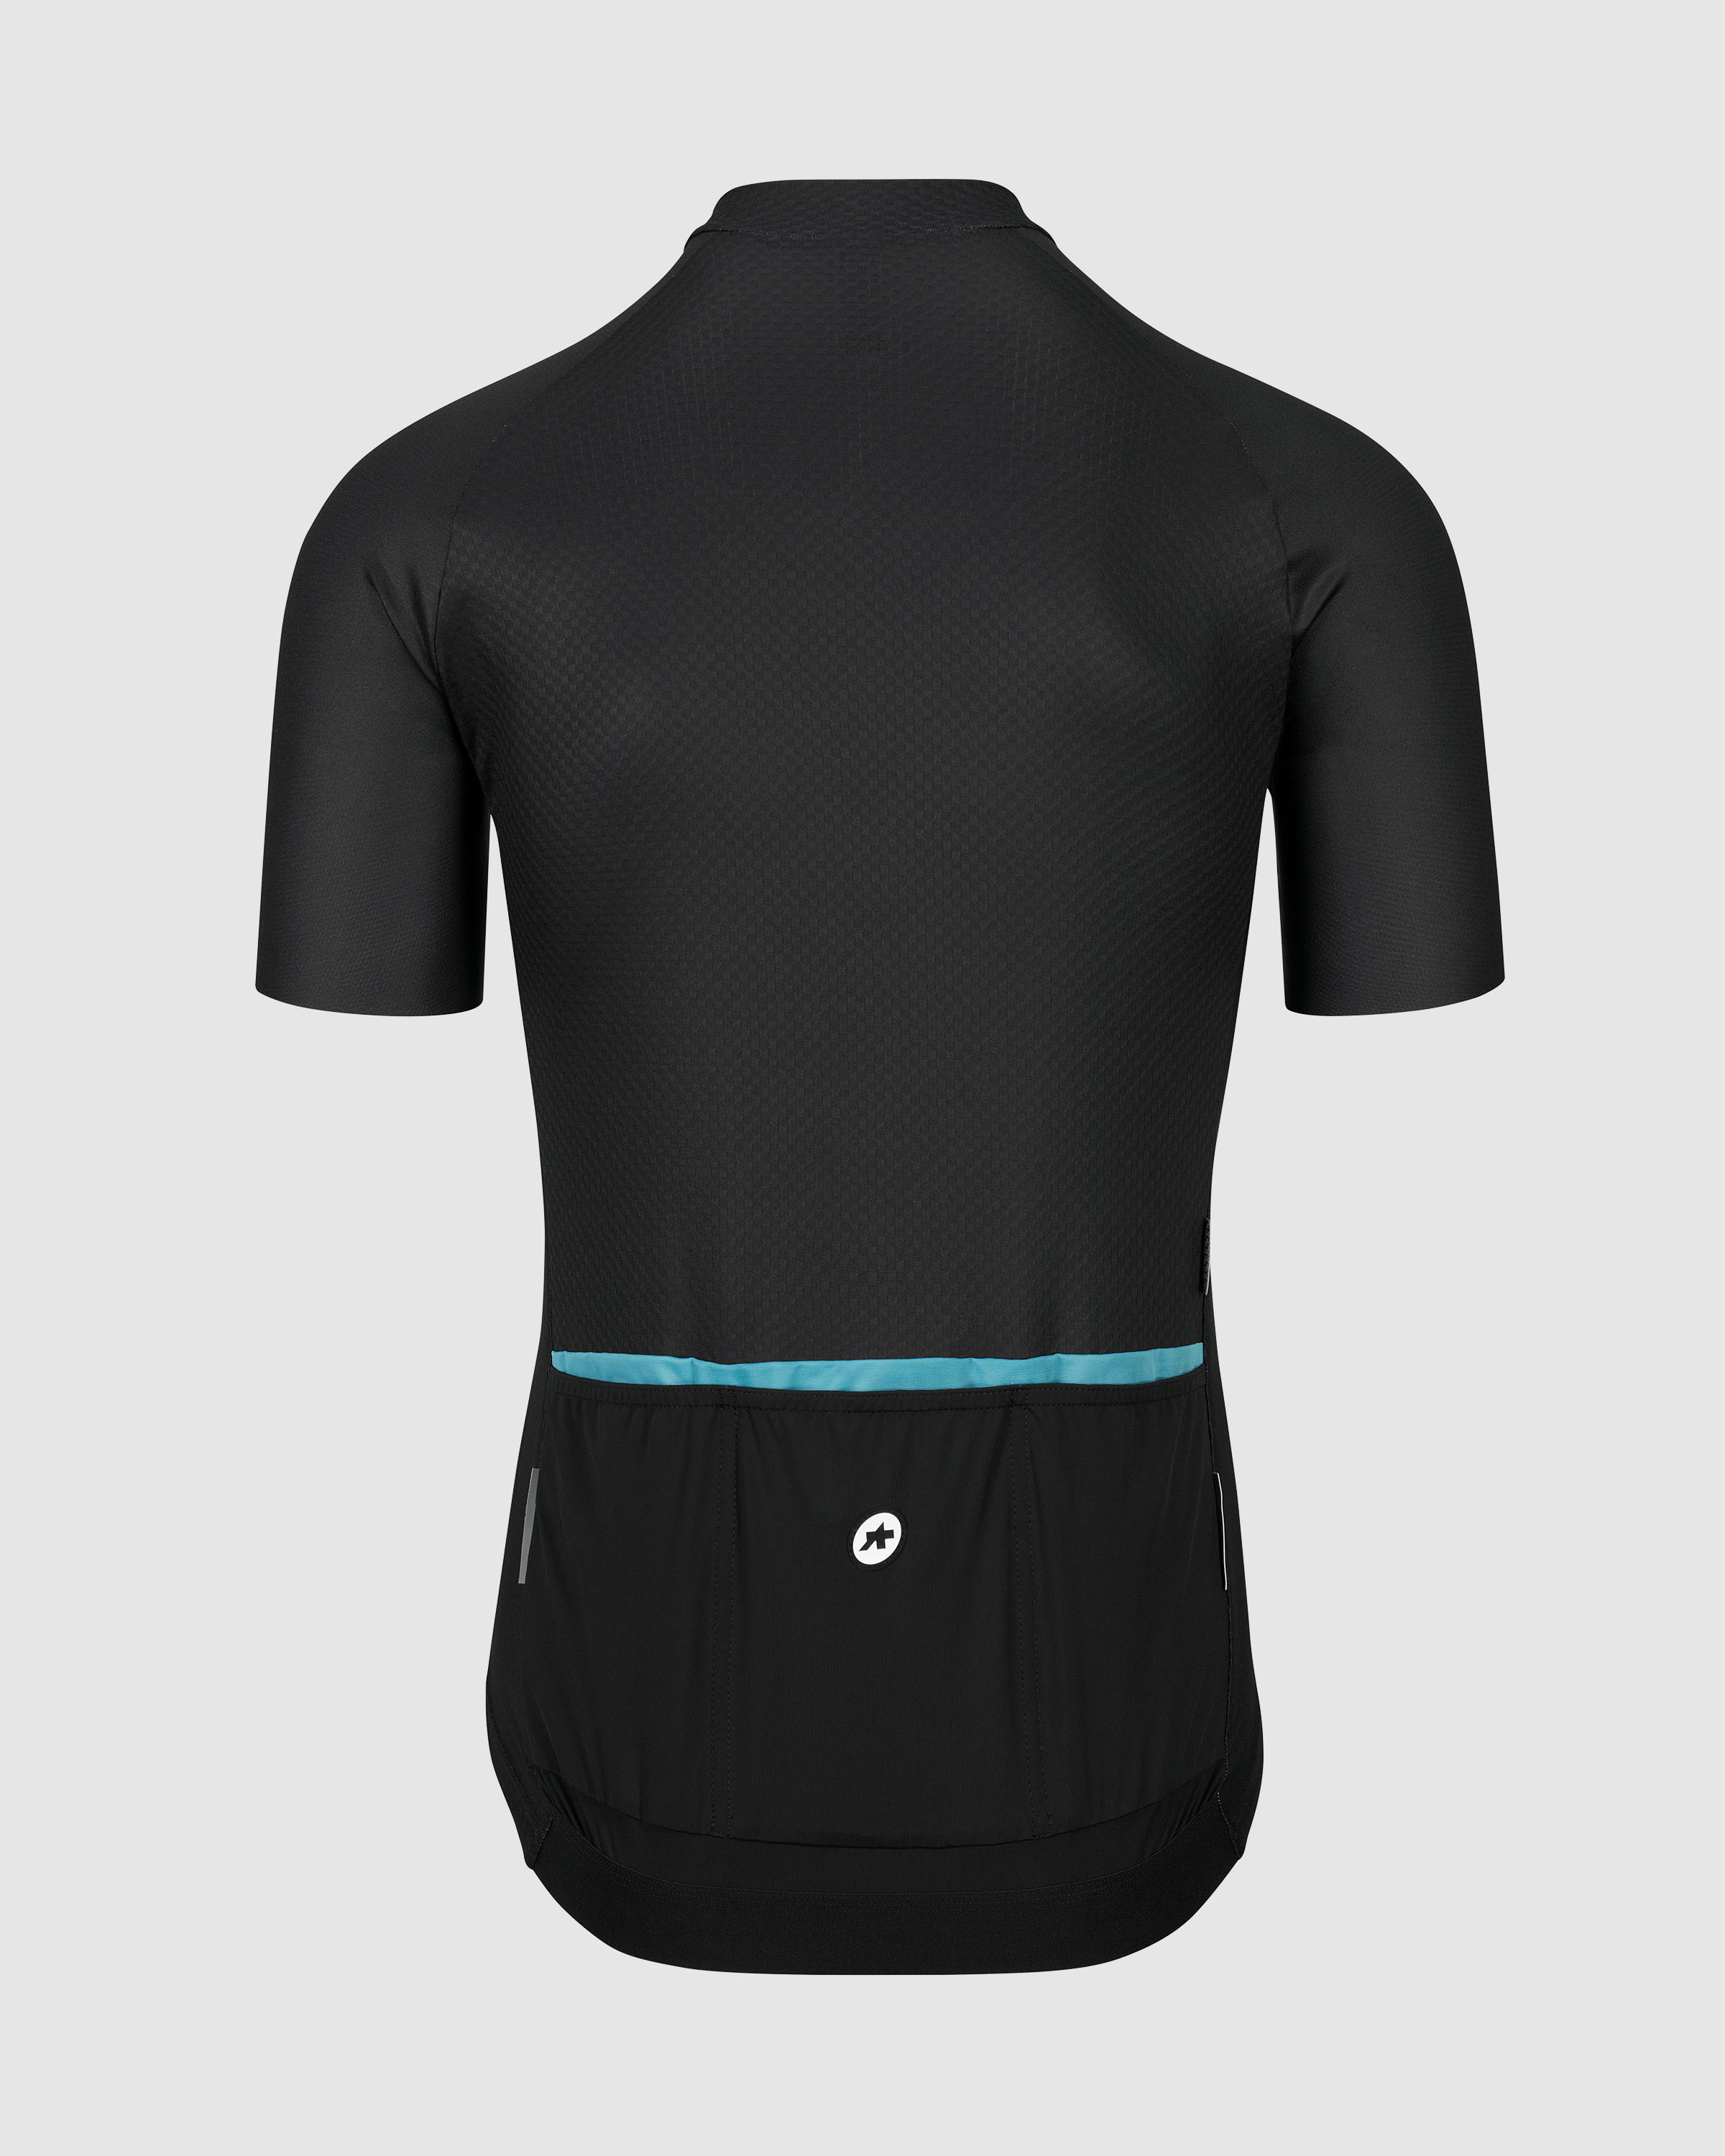 MILLE GT Jersey C2 - ASSOS Of Switzerland - Official Outlet